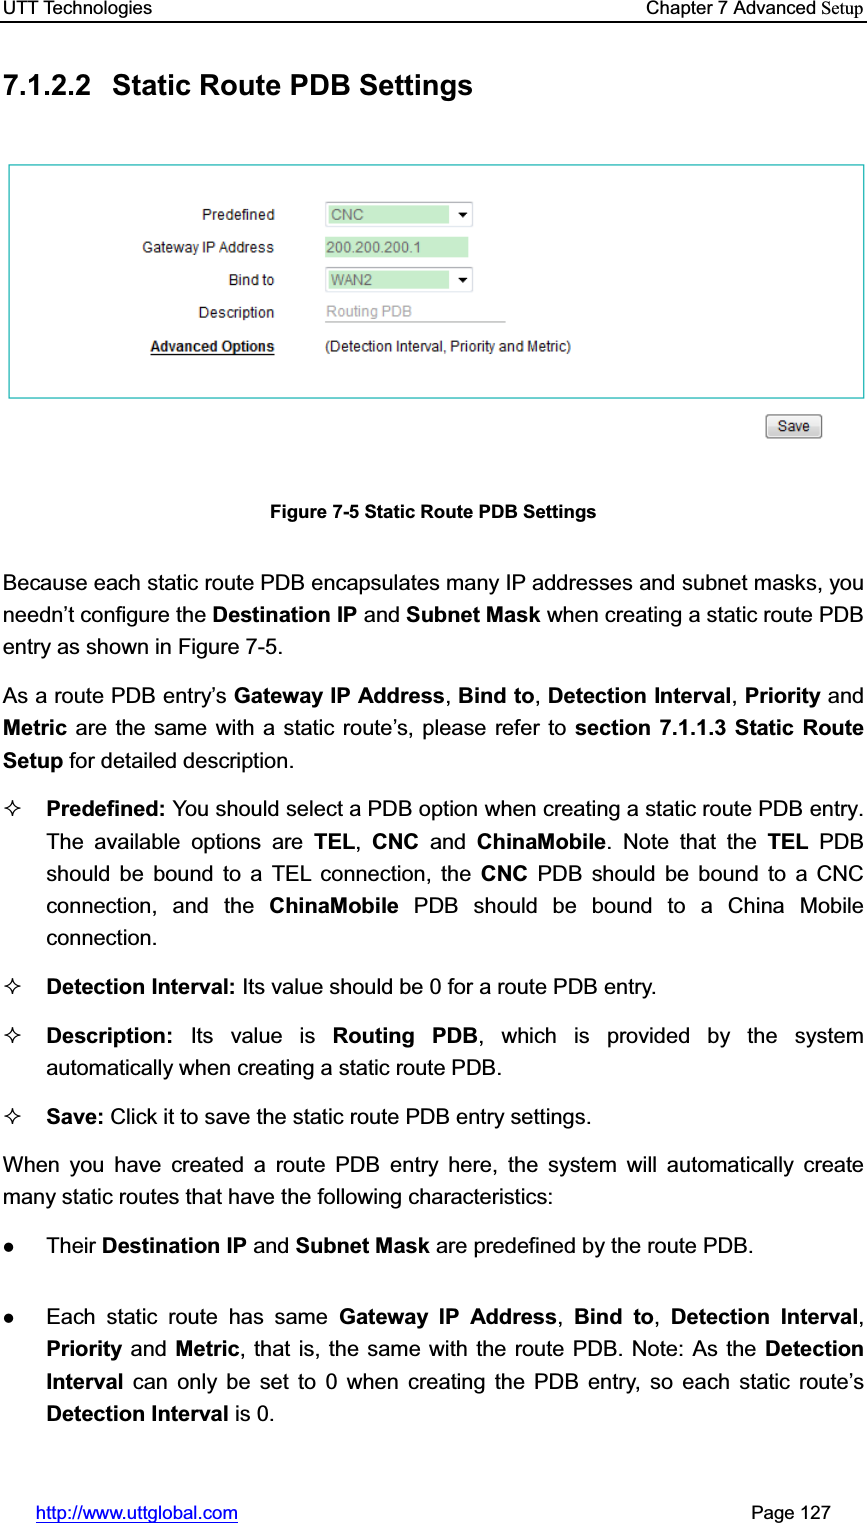 UTT Technologies    Chapter 7 Advanced Setuphttp://www.uttglobal.com                                                       Page 127 7.1.2.2  Static Route PDB Settings Figure 7-5 Static Route PDB Settings Because each static route PDB encapsulates many IP addresses and subnet masks, you needn¶t configure the Destination IP and Subnet Mask when creating a static route PDB entry as shown in Figure 7-5. As a route PDB entry¶sGateway IP Address,Bind to,Detection Interval,Priority and Metric  are the same with a static route¶s, please refer to section 7.1.1.3 Static Route Setup for detailed description.   Predefined: You should select a PDB option when creating a static route PDB entry. The available options are TEL,CNC and ChinaMobile. Note that the TEL PDB should be bound to a TEL connection, the CNC PDB should be bound to a CNC connection, and the ChinaMobile  PDB should be bound to a China Mobile connection. Detection Interval: Its value should be 0 for a route PDB entry. Description: Its value is Routing PDB, which is provided by the system automatically when creating a static route PDB. Save: Click it to save the static route PDB entry settings. When you have created a route PDB entry here, the system will automatically create many static routes that have the following characteristics:     zTheir Destination IP and Subnet Mask are predefined by the route PDB. zEach static route has same Gateway IP Address,Bind to,Detection Interval,Priority and Metric, that is, the same with the route PDB. Note: As the Detection Interval can only be set to 0 when creating the PDB entry, so each static route¶sDetection Interval is 0.   